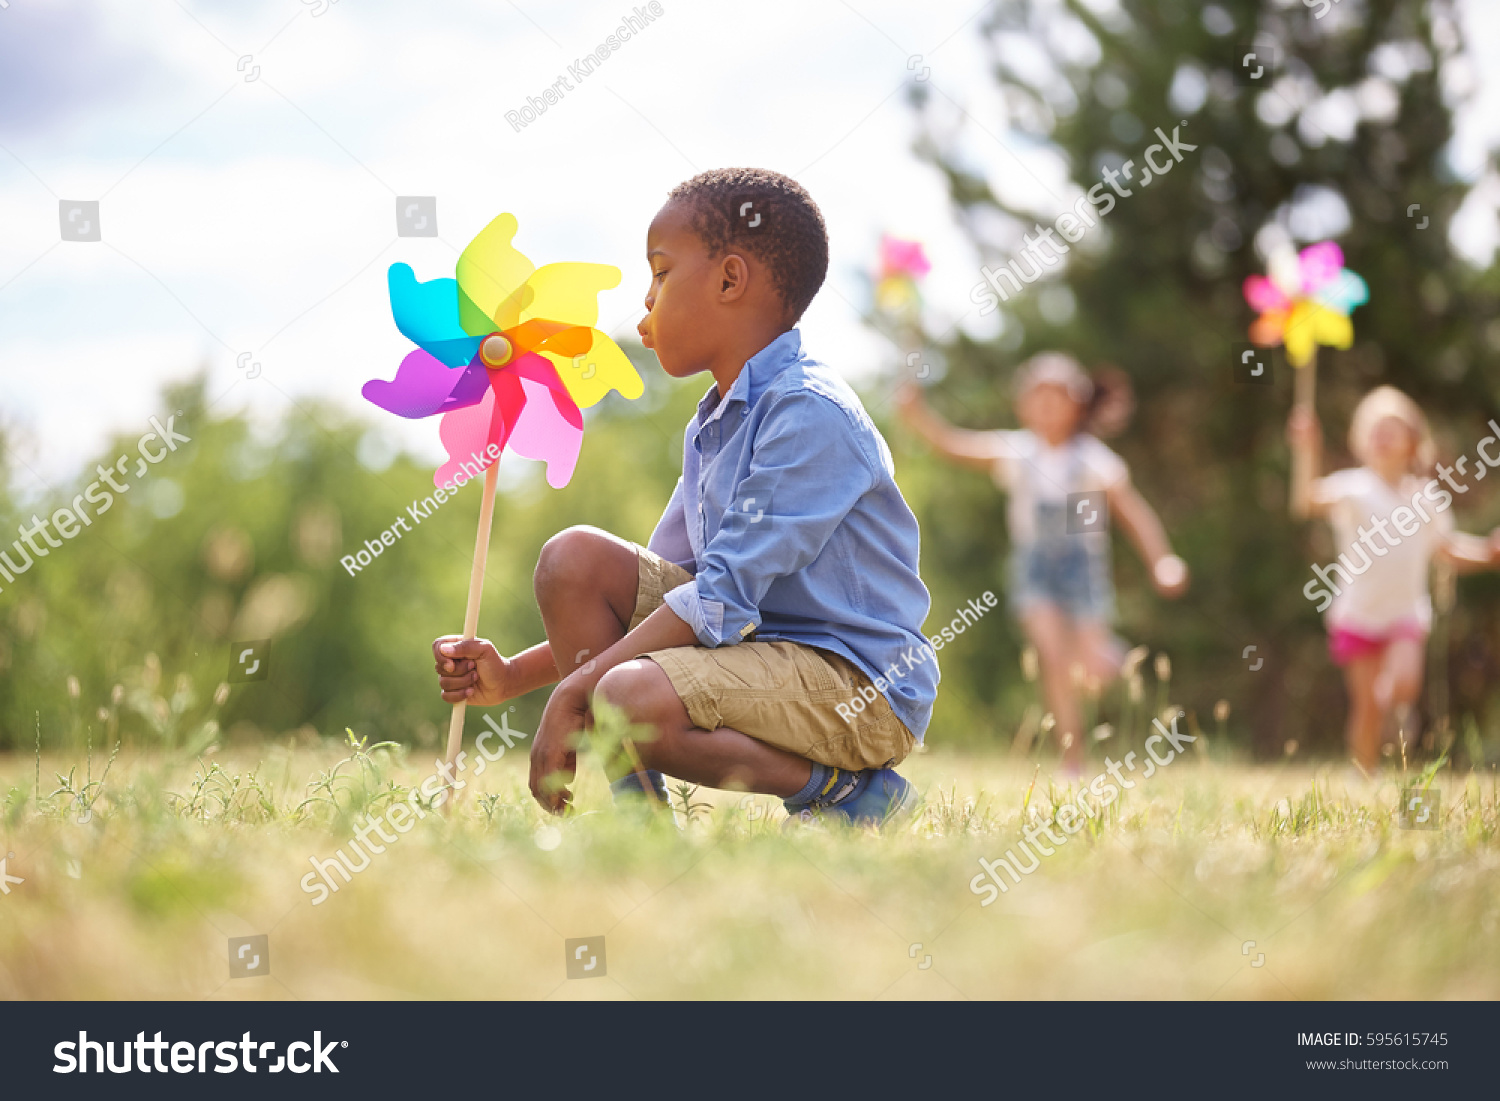 African boy and friends with pinwheels playing at the park #595615745